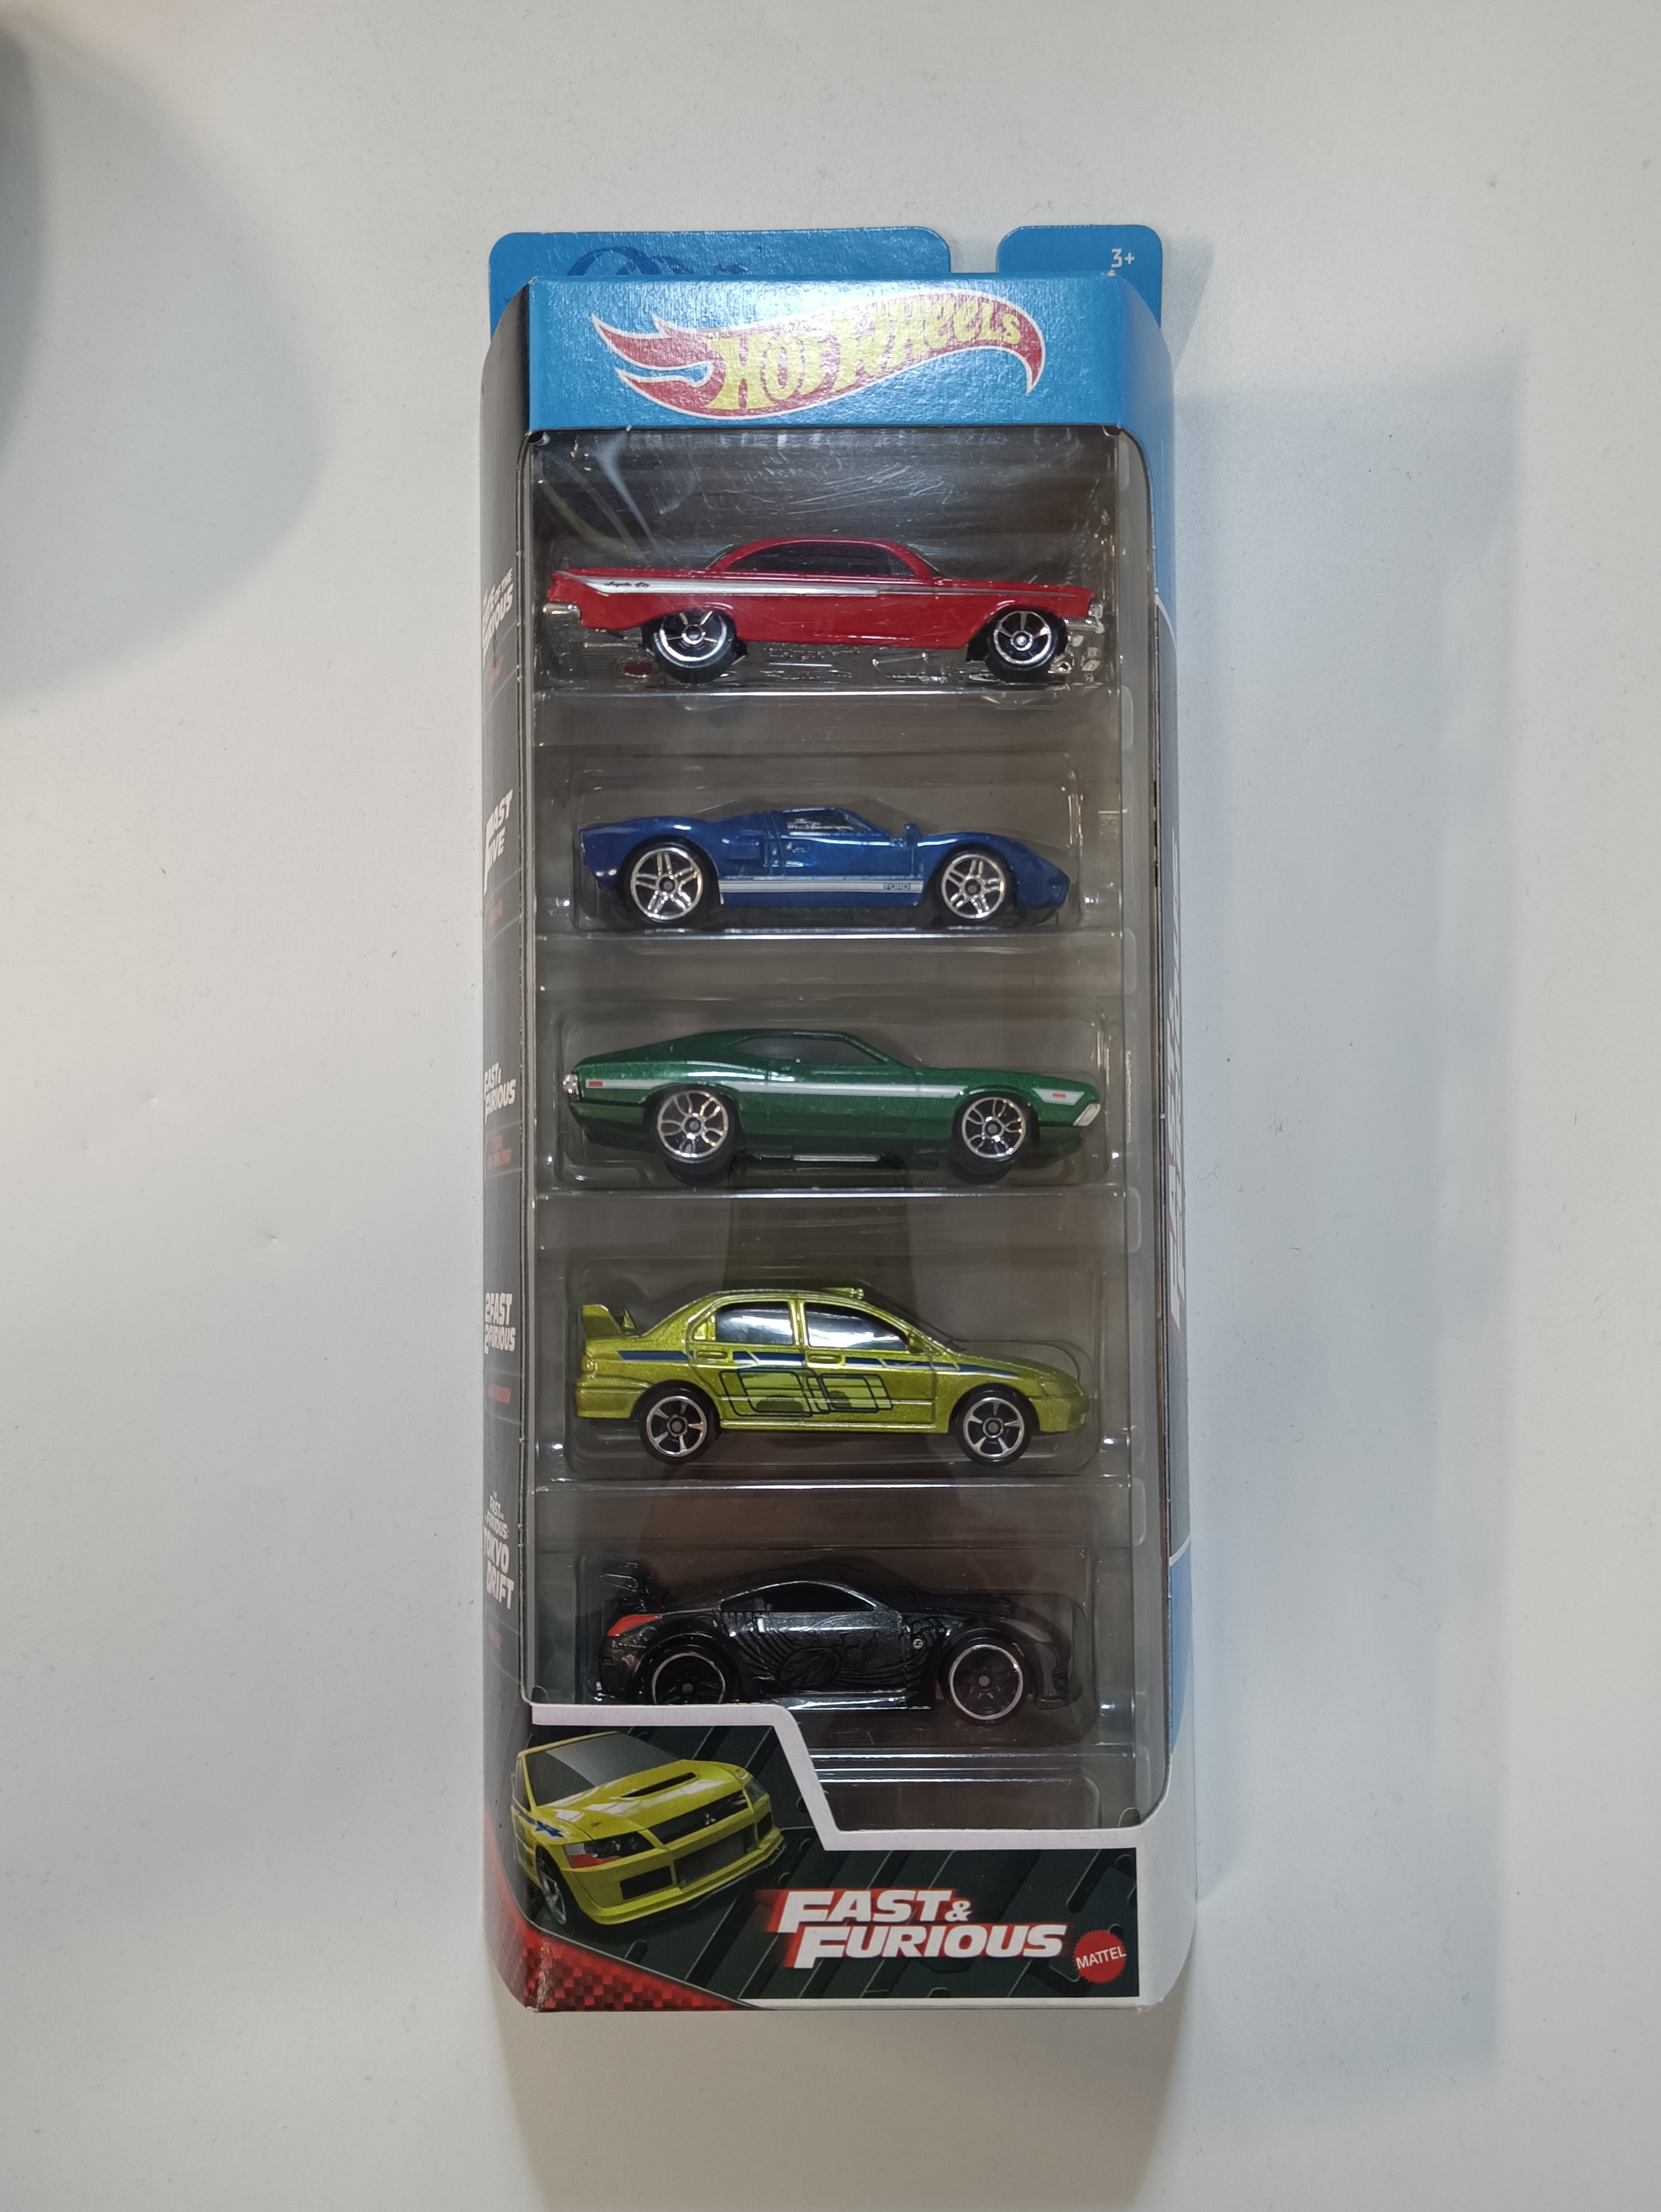 2020 HOTWHEELS FAST AND FURIOUS 5 PACK BRAND NEW 